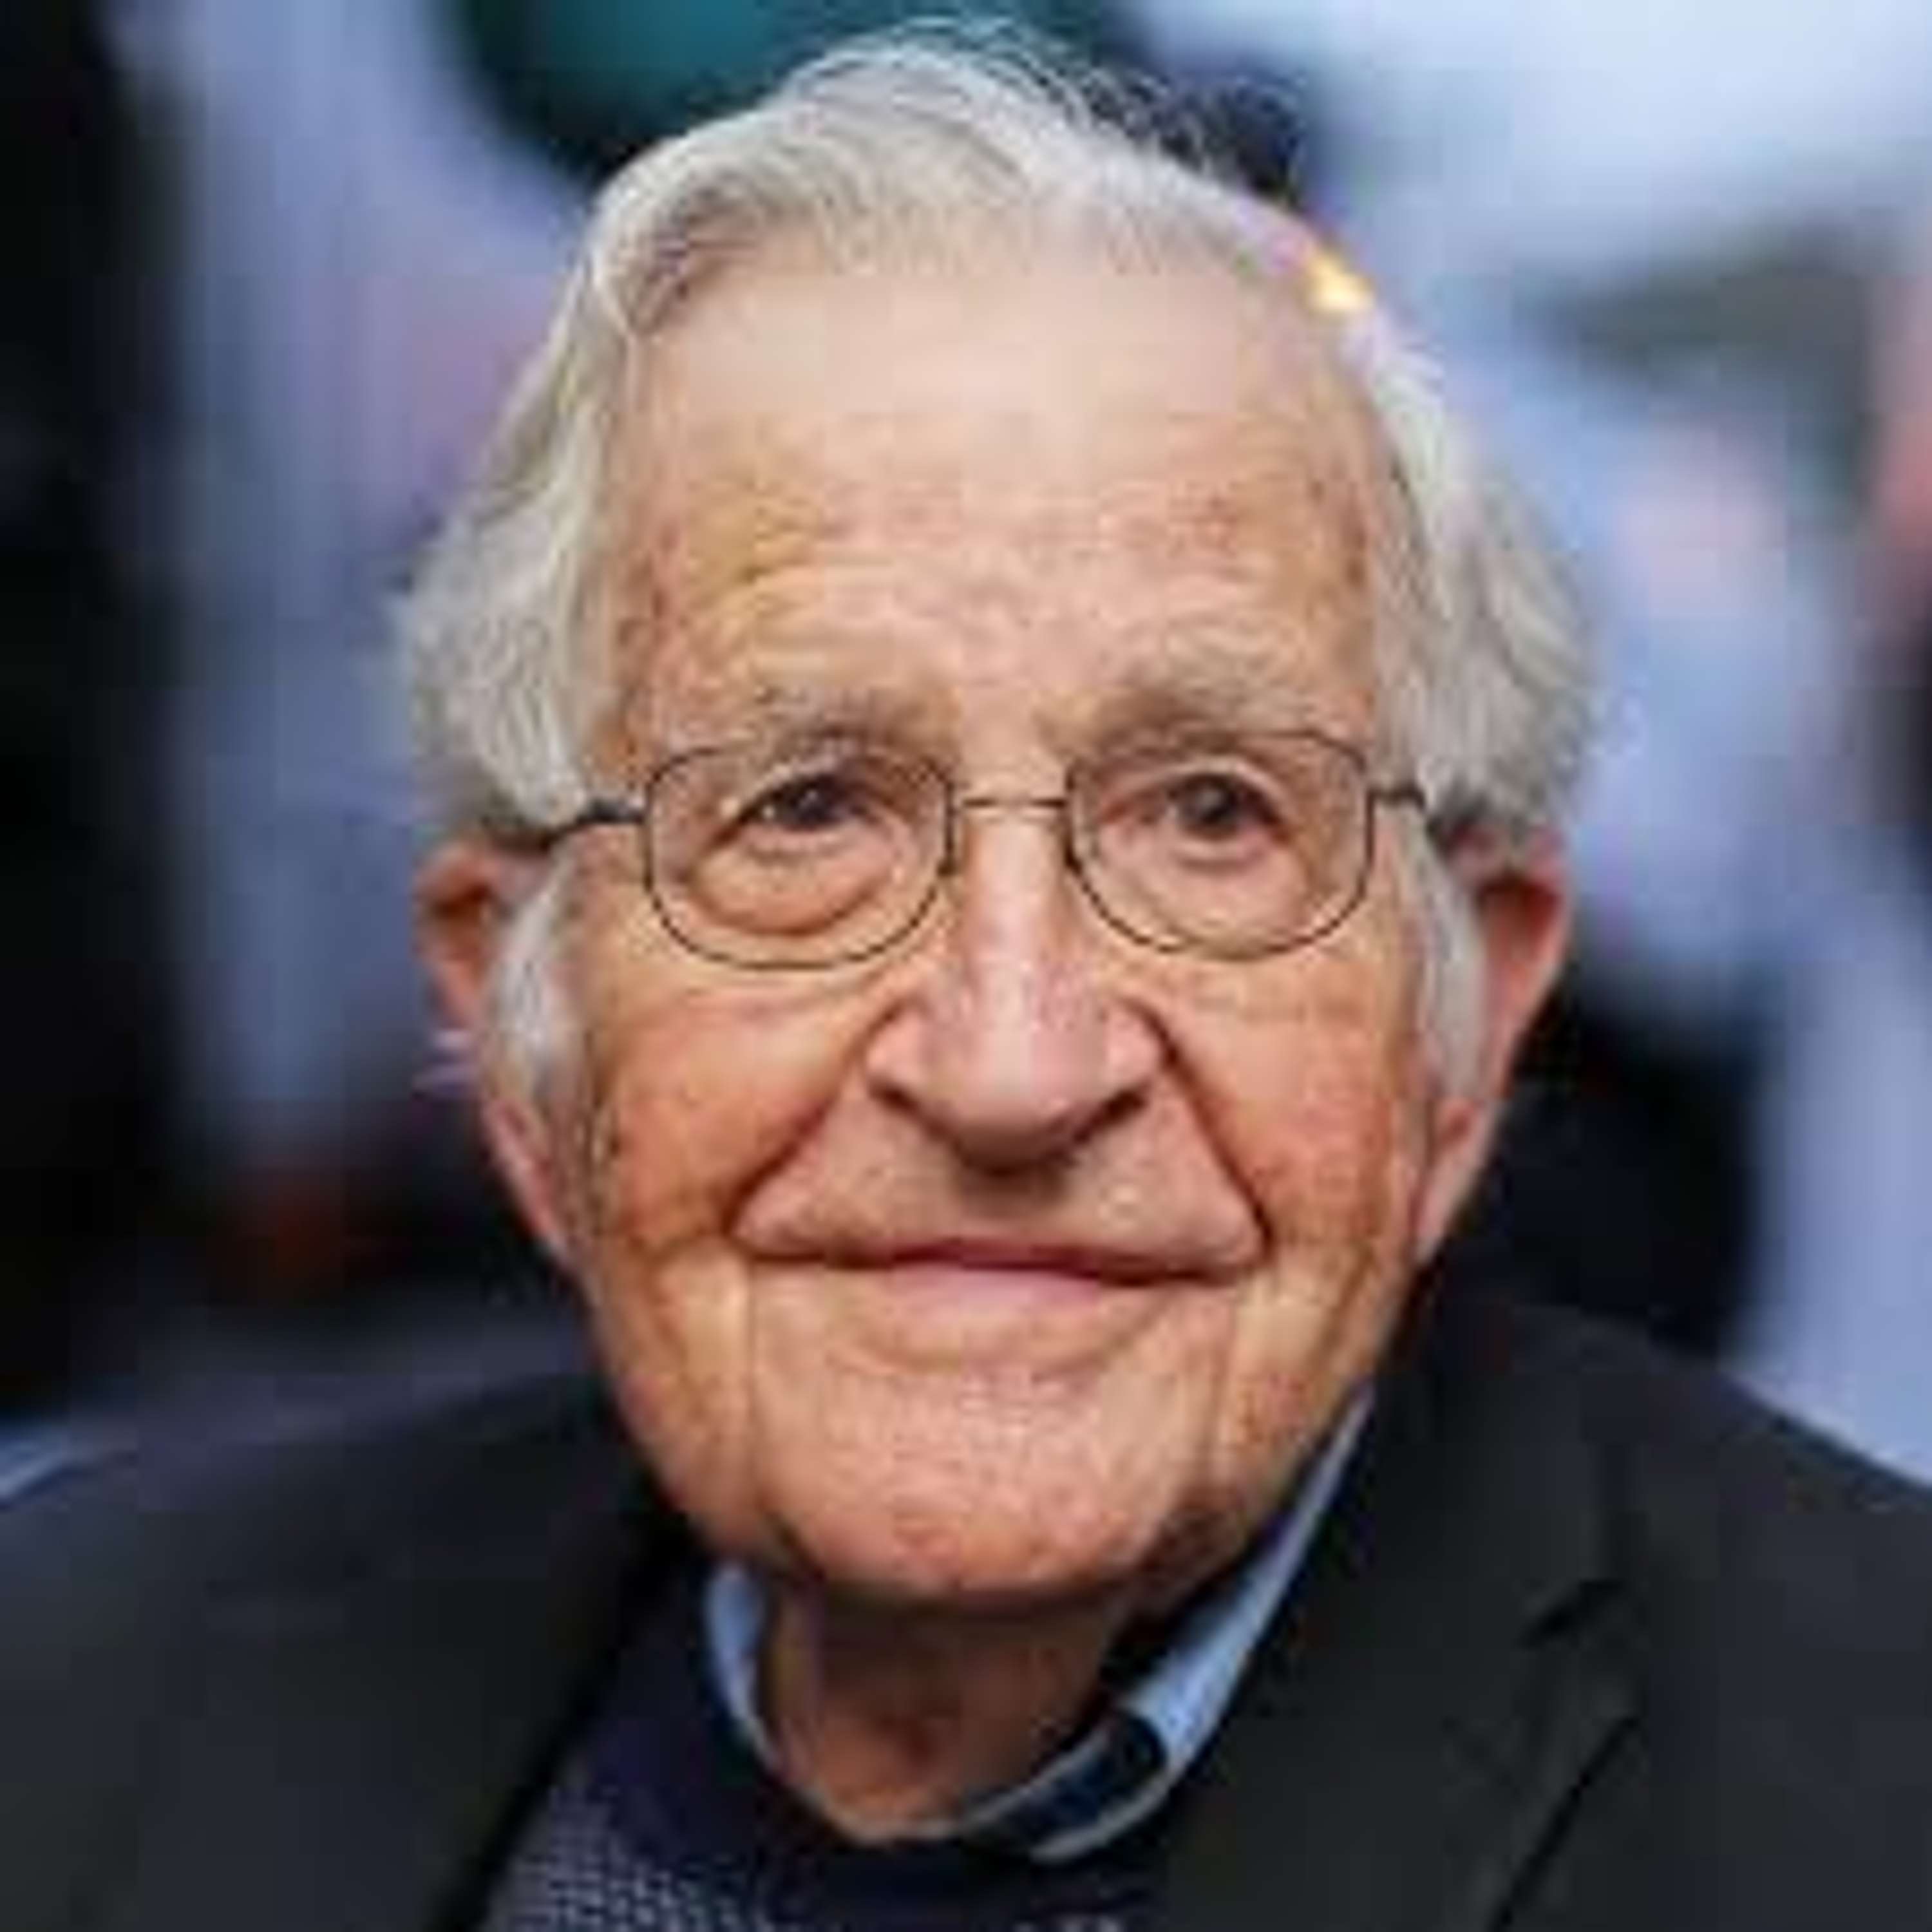 Episode 84: Interview with Noam Chomsky, pioneering linguist, social critic, and political activist on the environmental crises we are facing